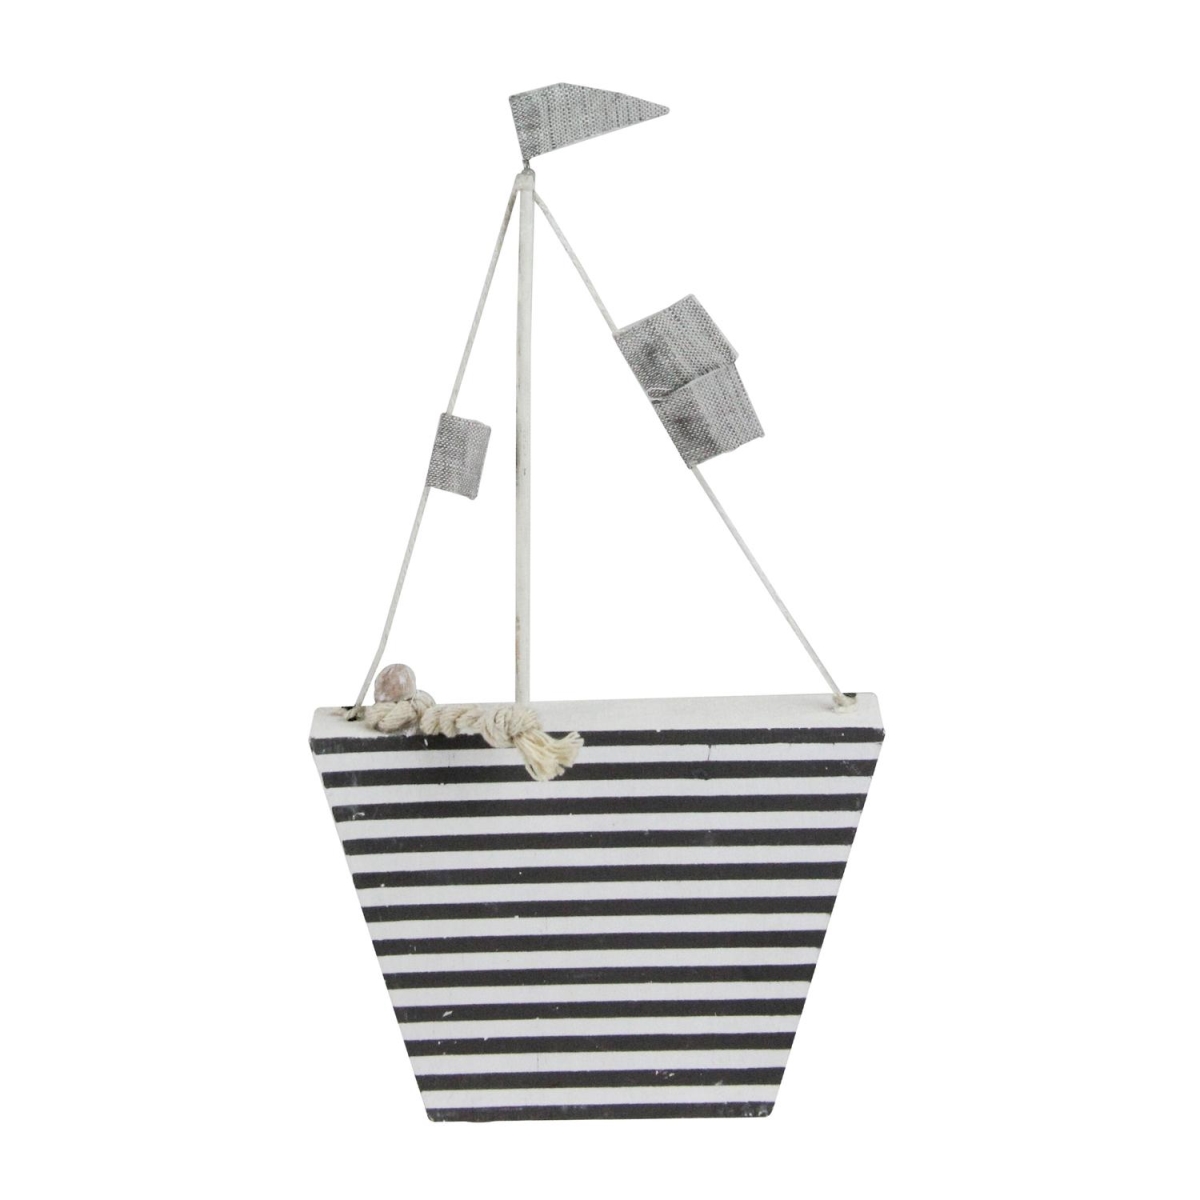 Picture of Northlight 32735193 9.5 in. Cape Cod Inspired White & Gray Striped Boat Table Top Decoration